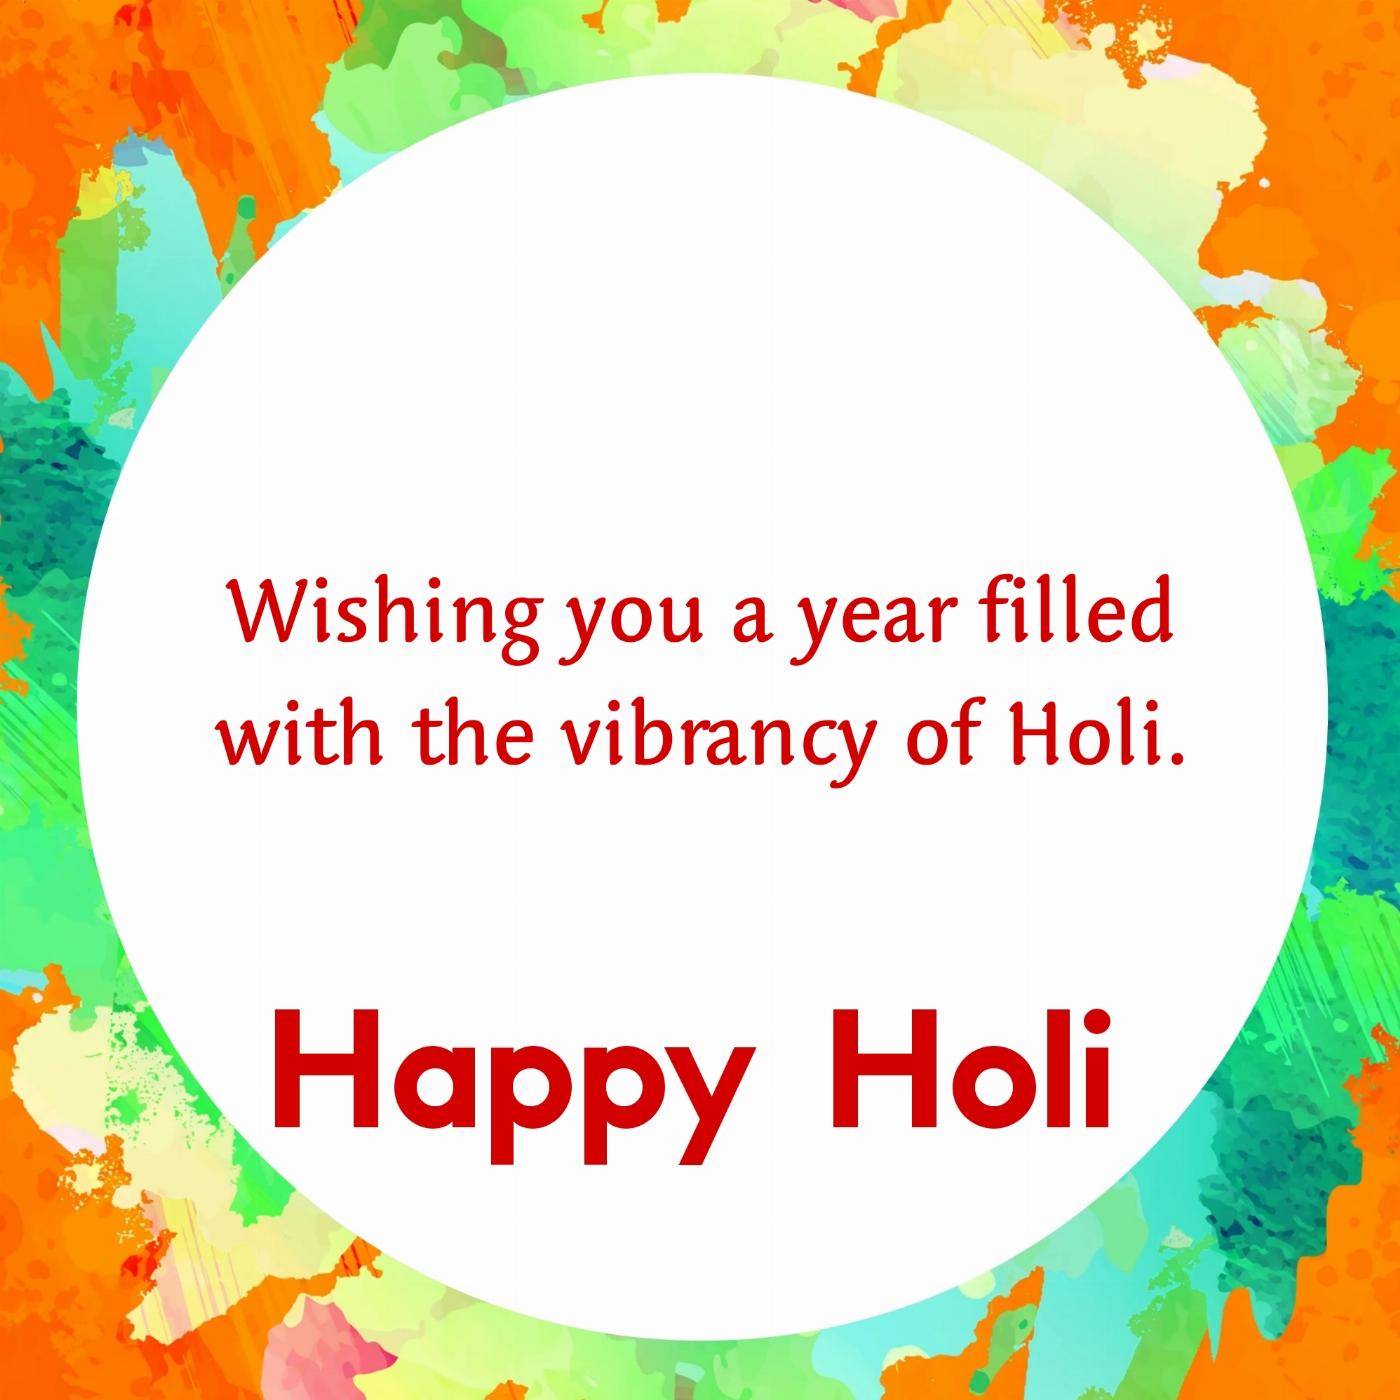 Wishing you a year filled with the vibrancy of Holi